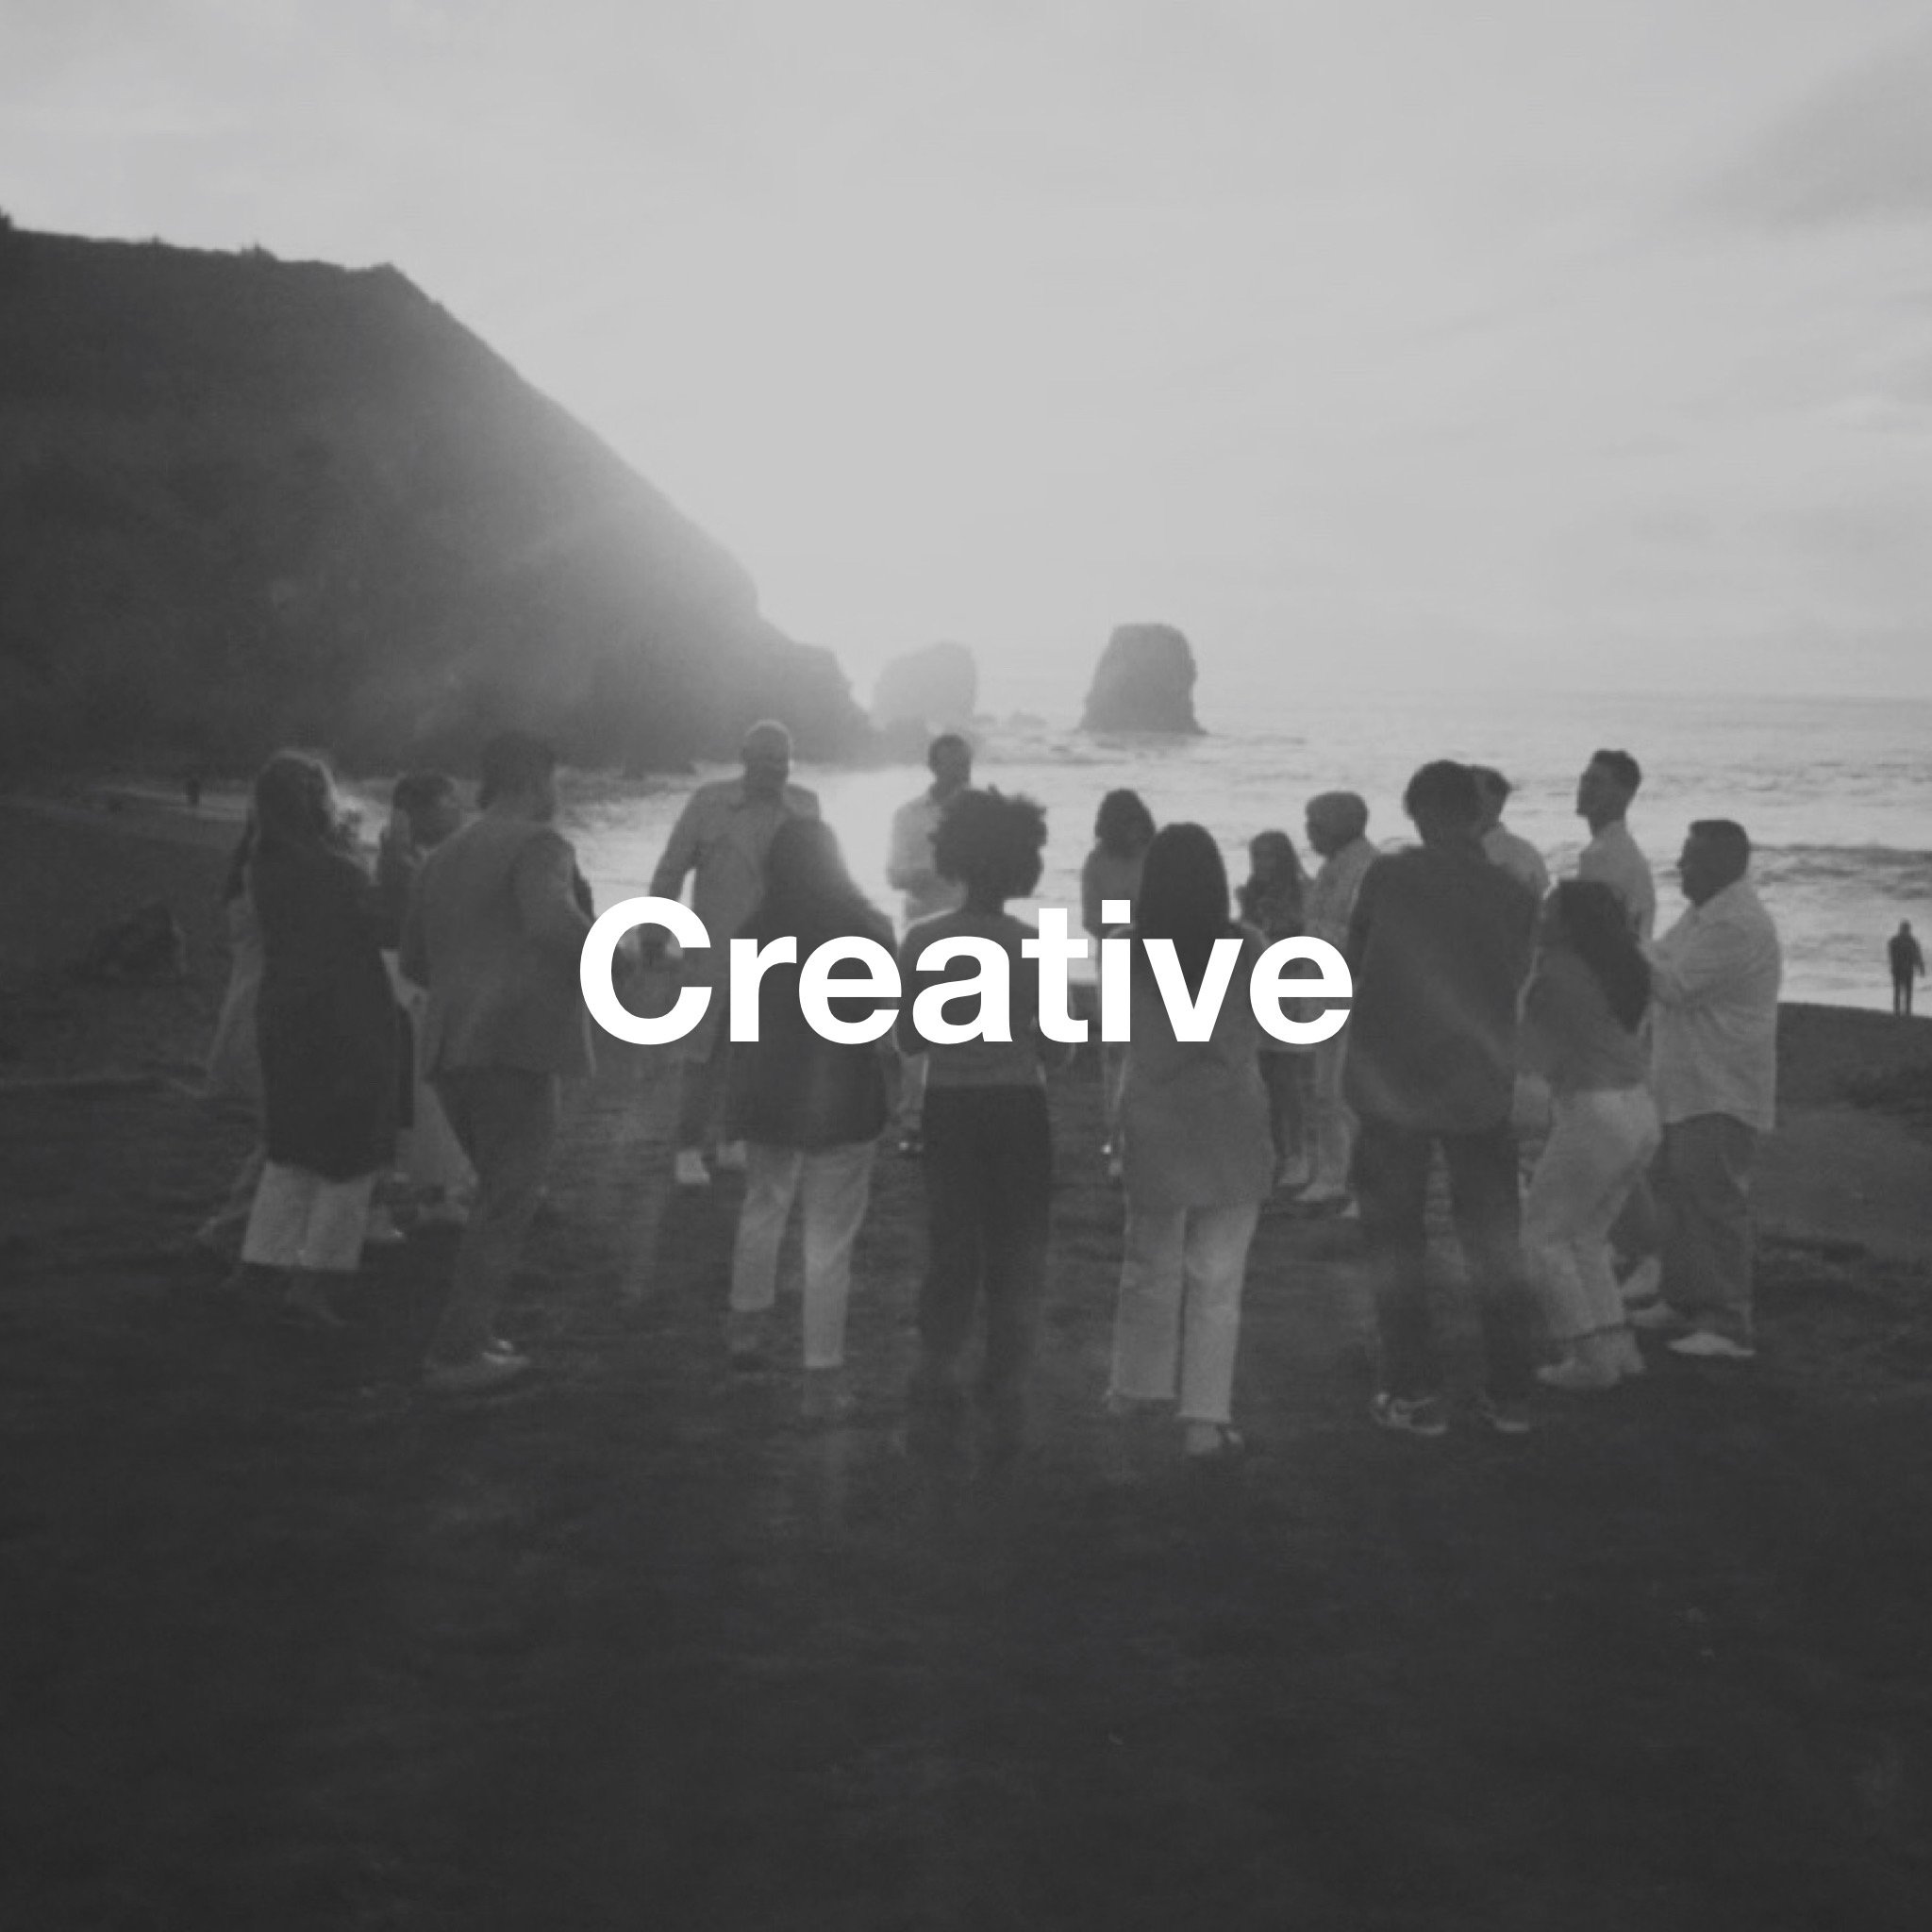 Join the Creative Team